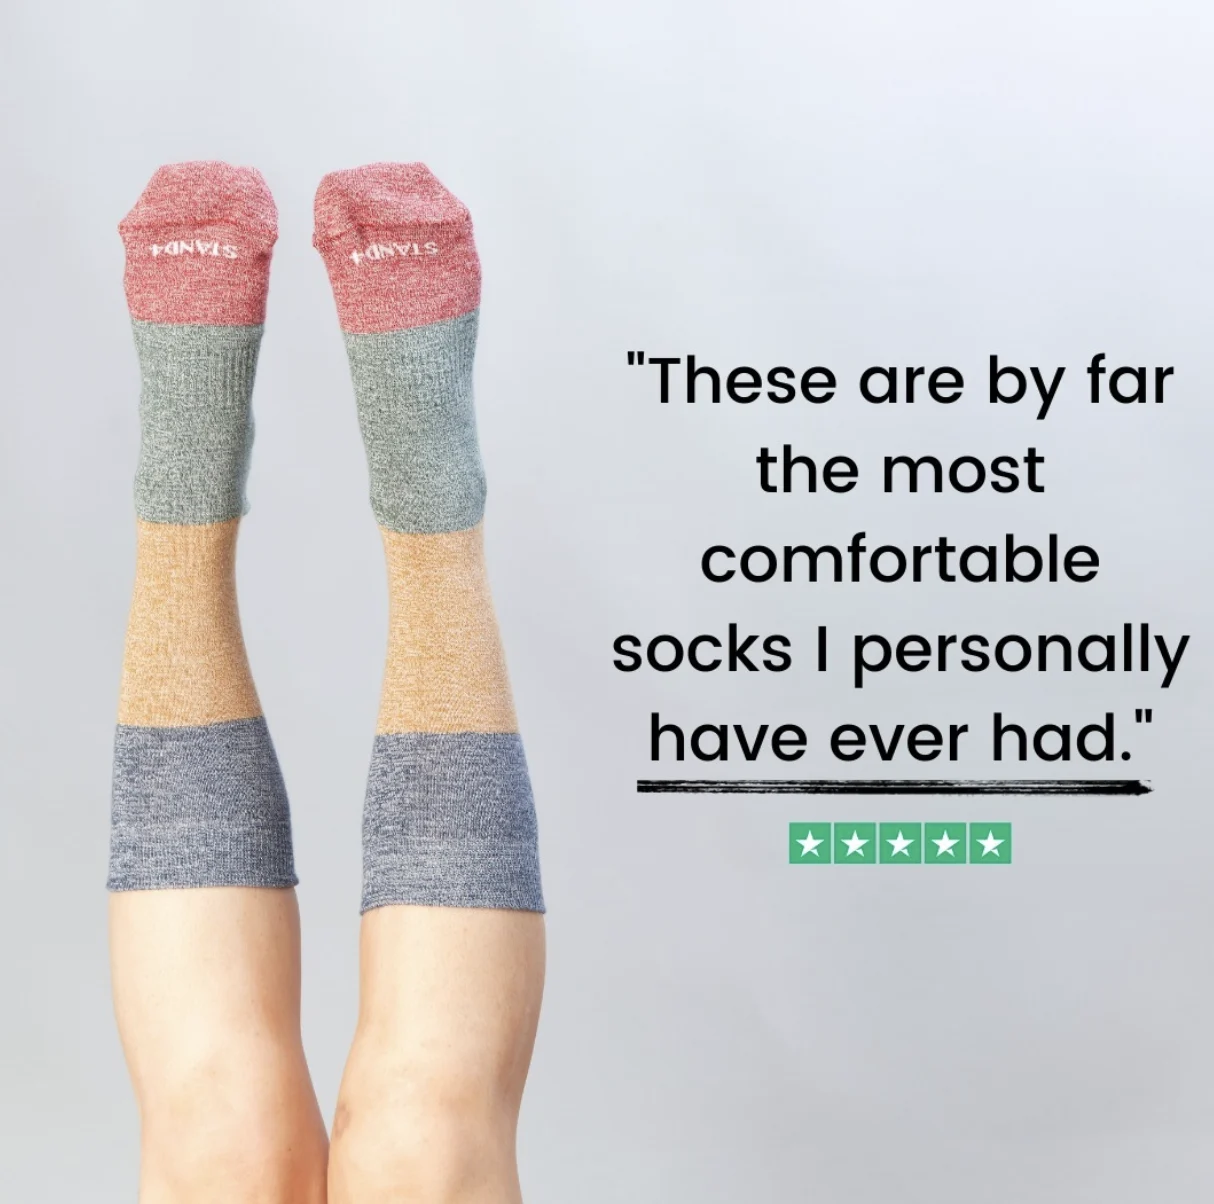 Putting your best foot forward — The Stand4 Socks Trustpilot story